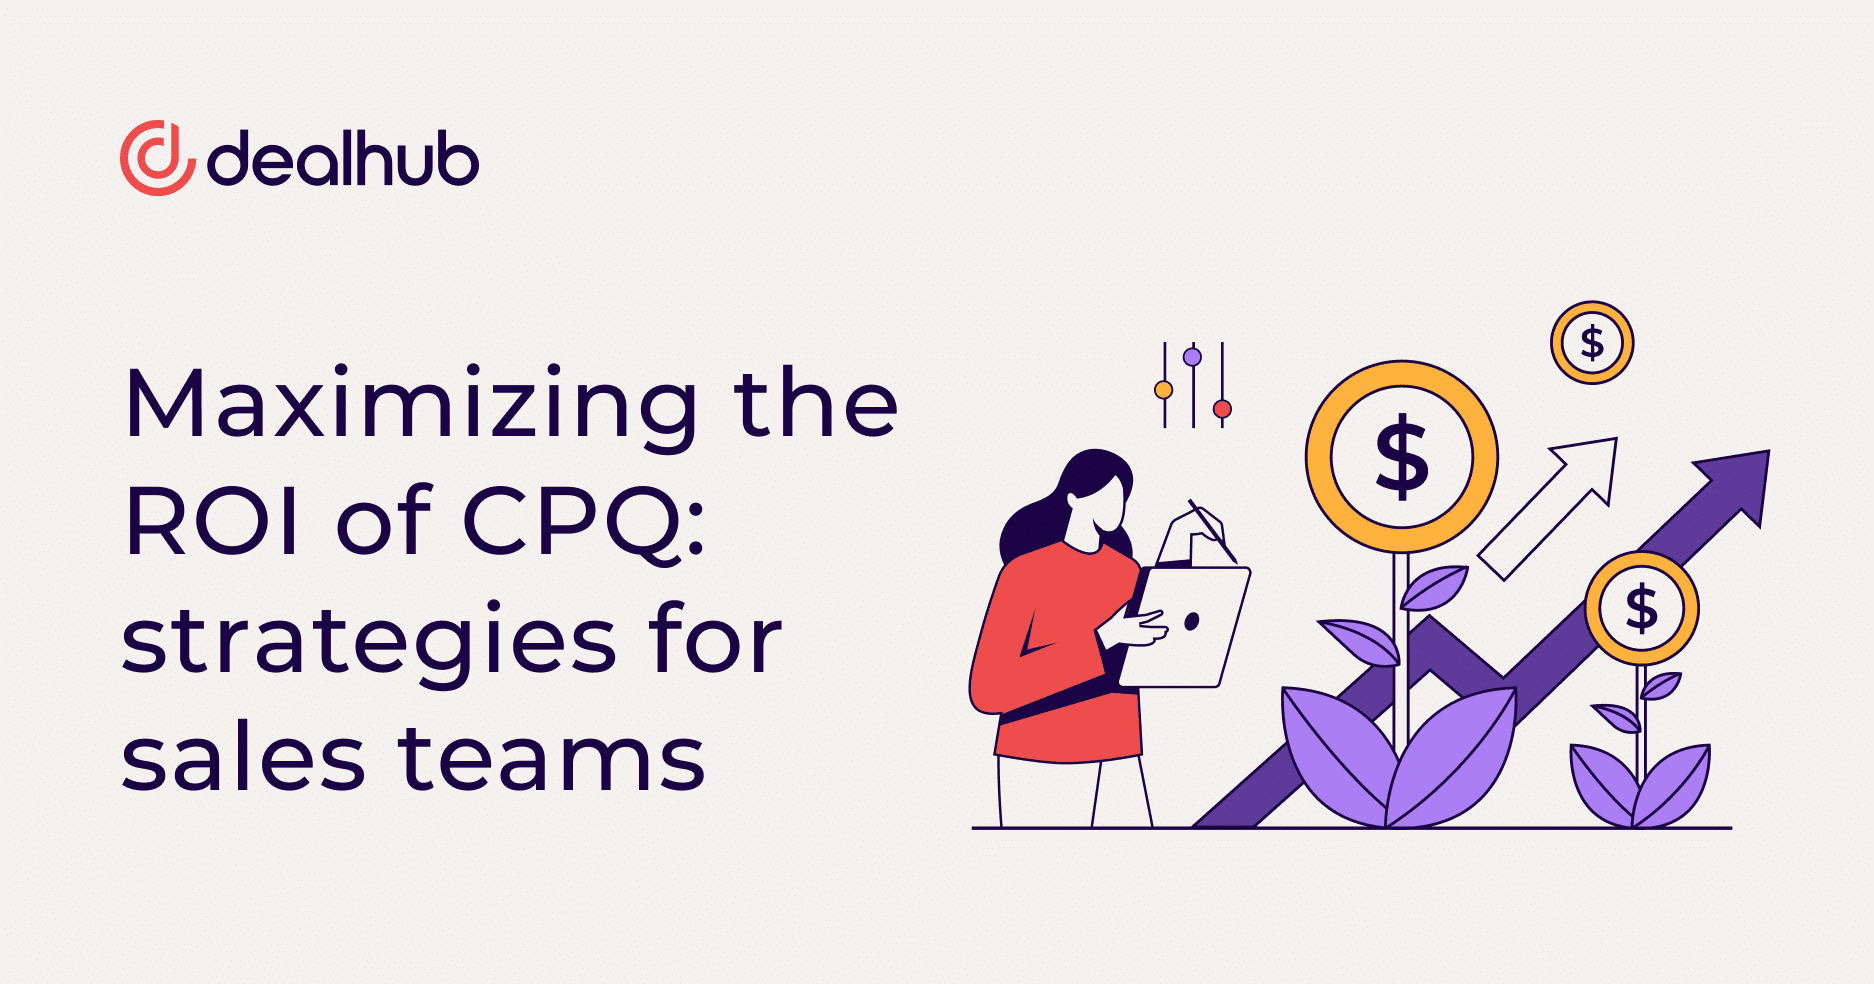 Maximizing the ROI of CPQ: strategies for sales teams